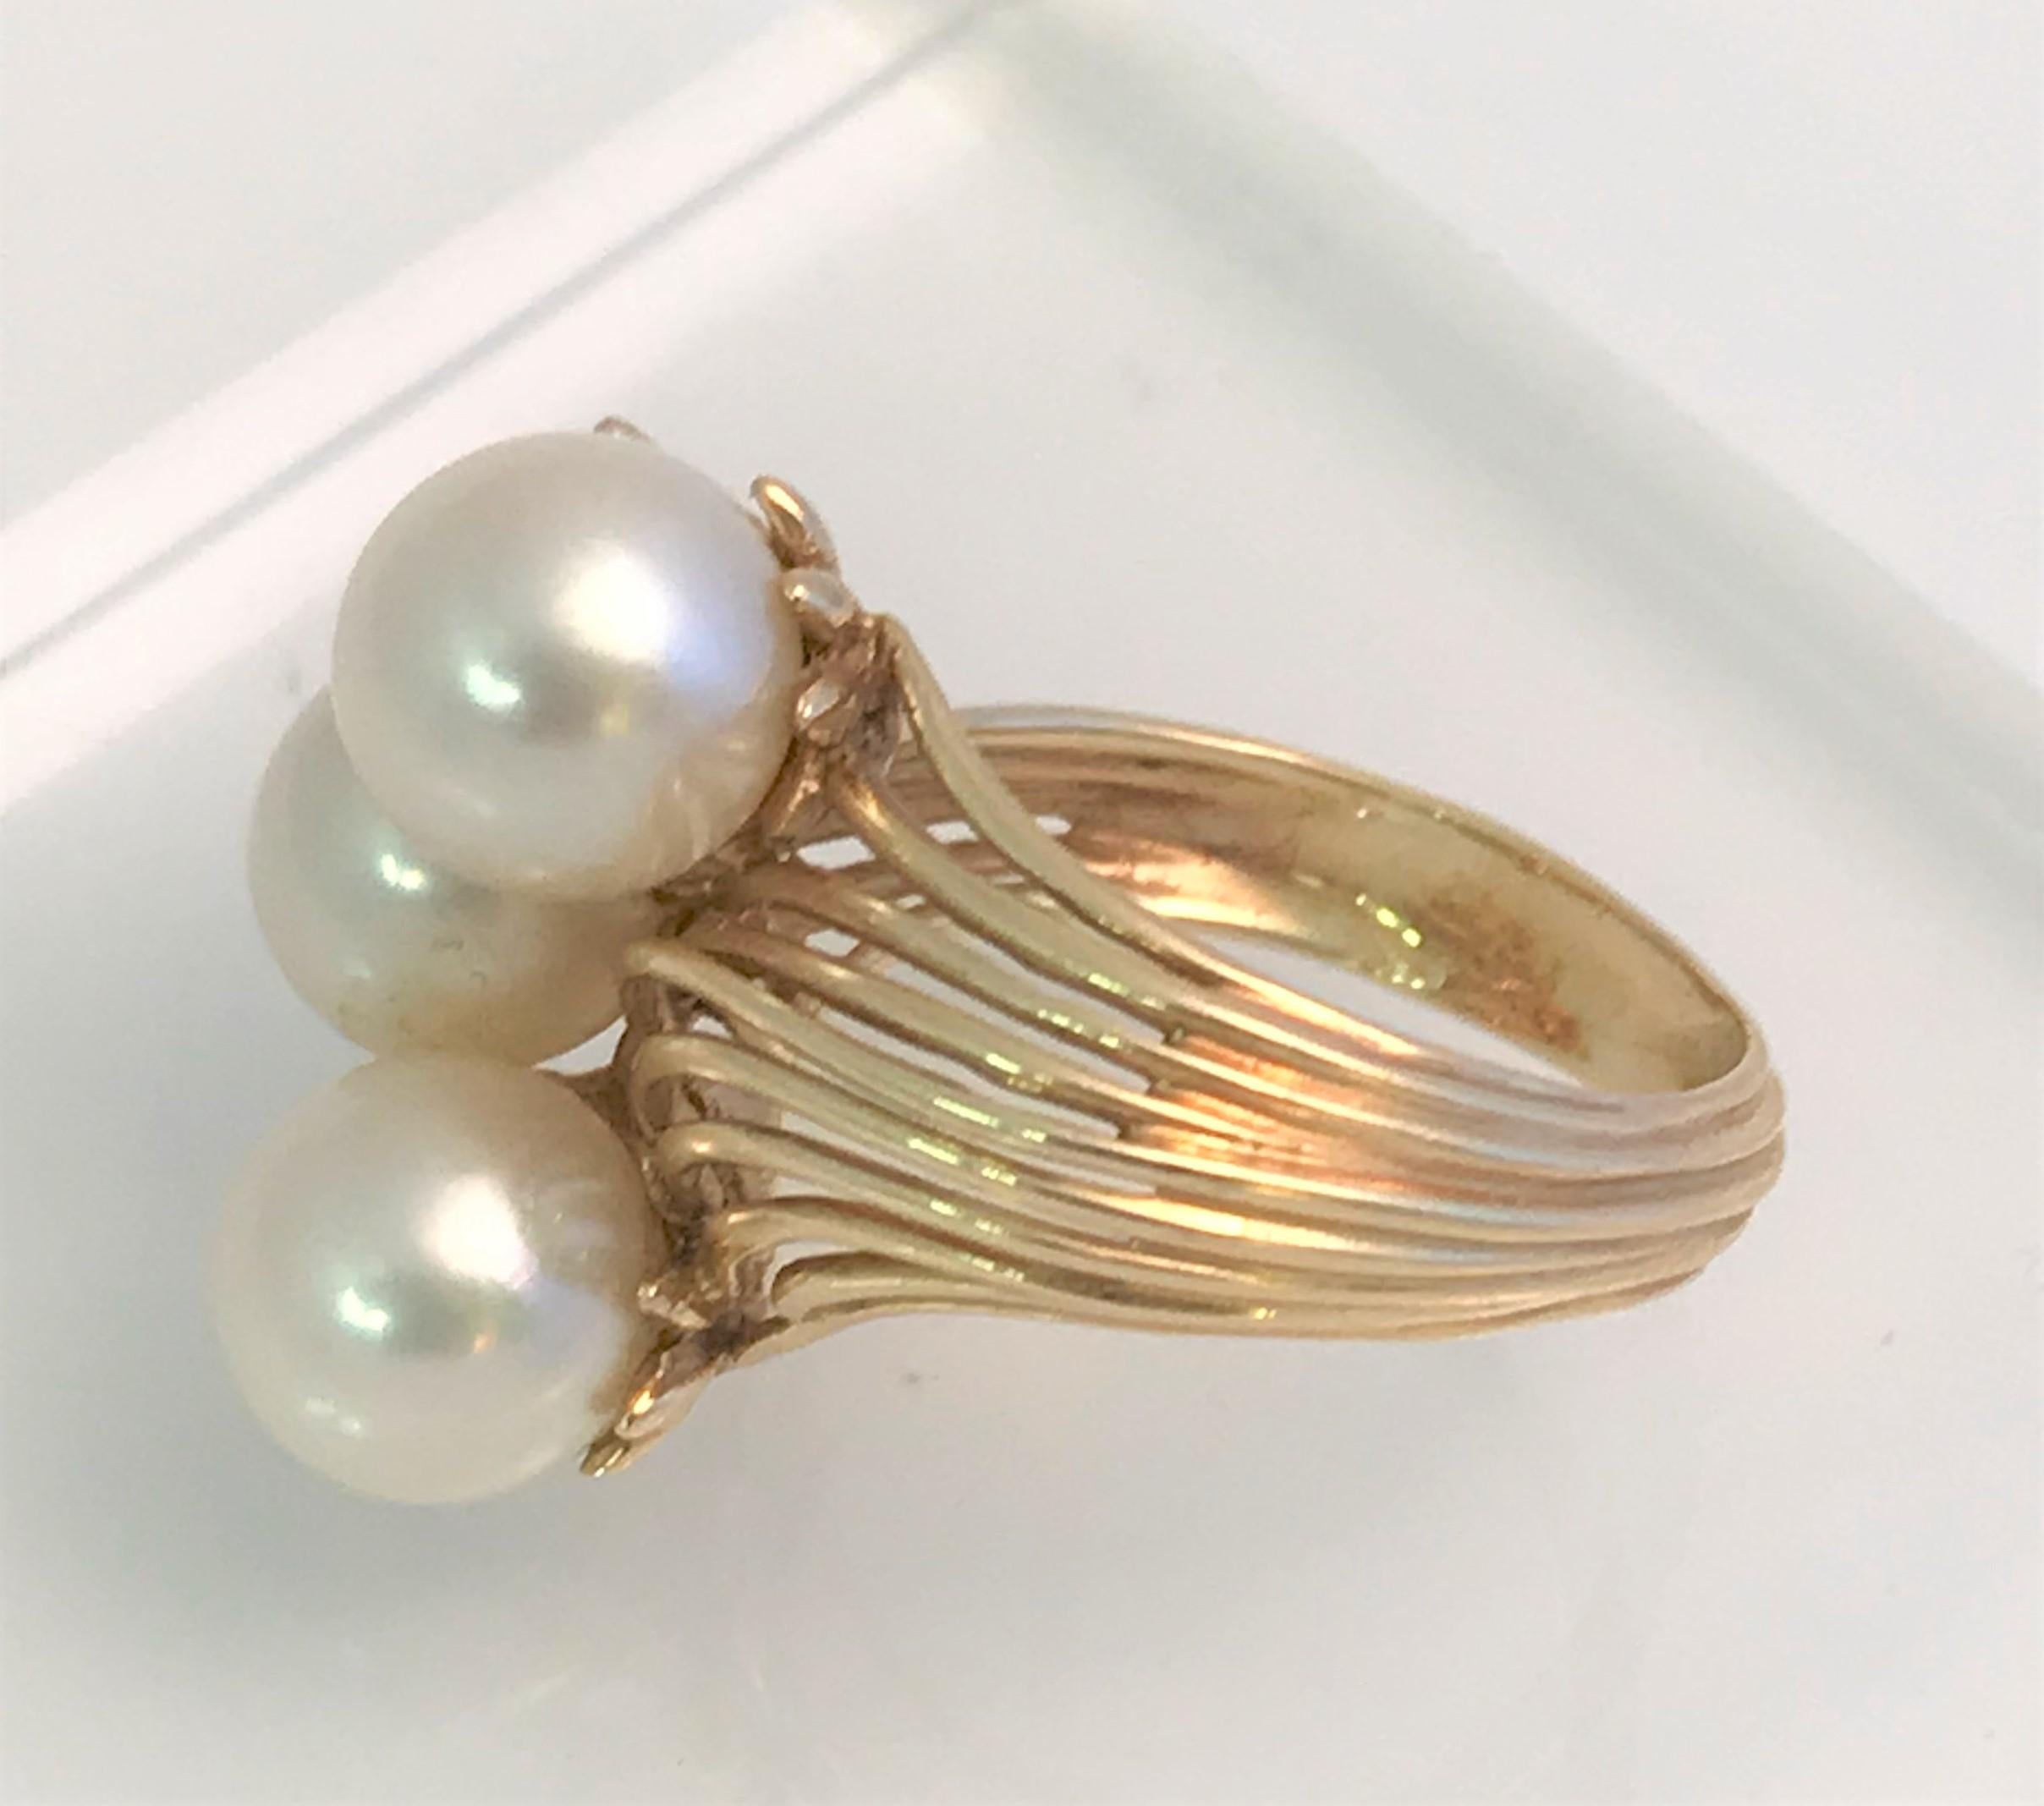 This beautiful ring is timeless and a must have!
14 karat yellow gold
3 white pearls, approximately 8mm round
4 round diamonds, approximately .05 each
Beautiful open wave shoulders and ribbed shank.
Size is approximately 5.5